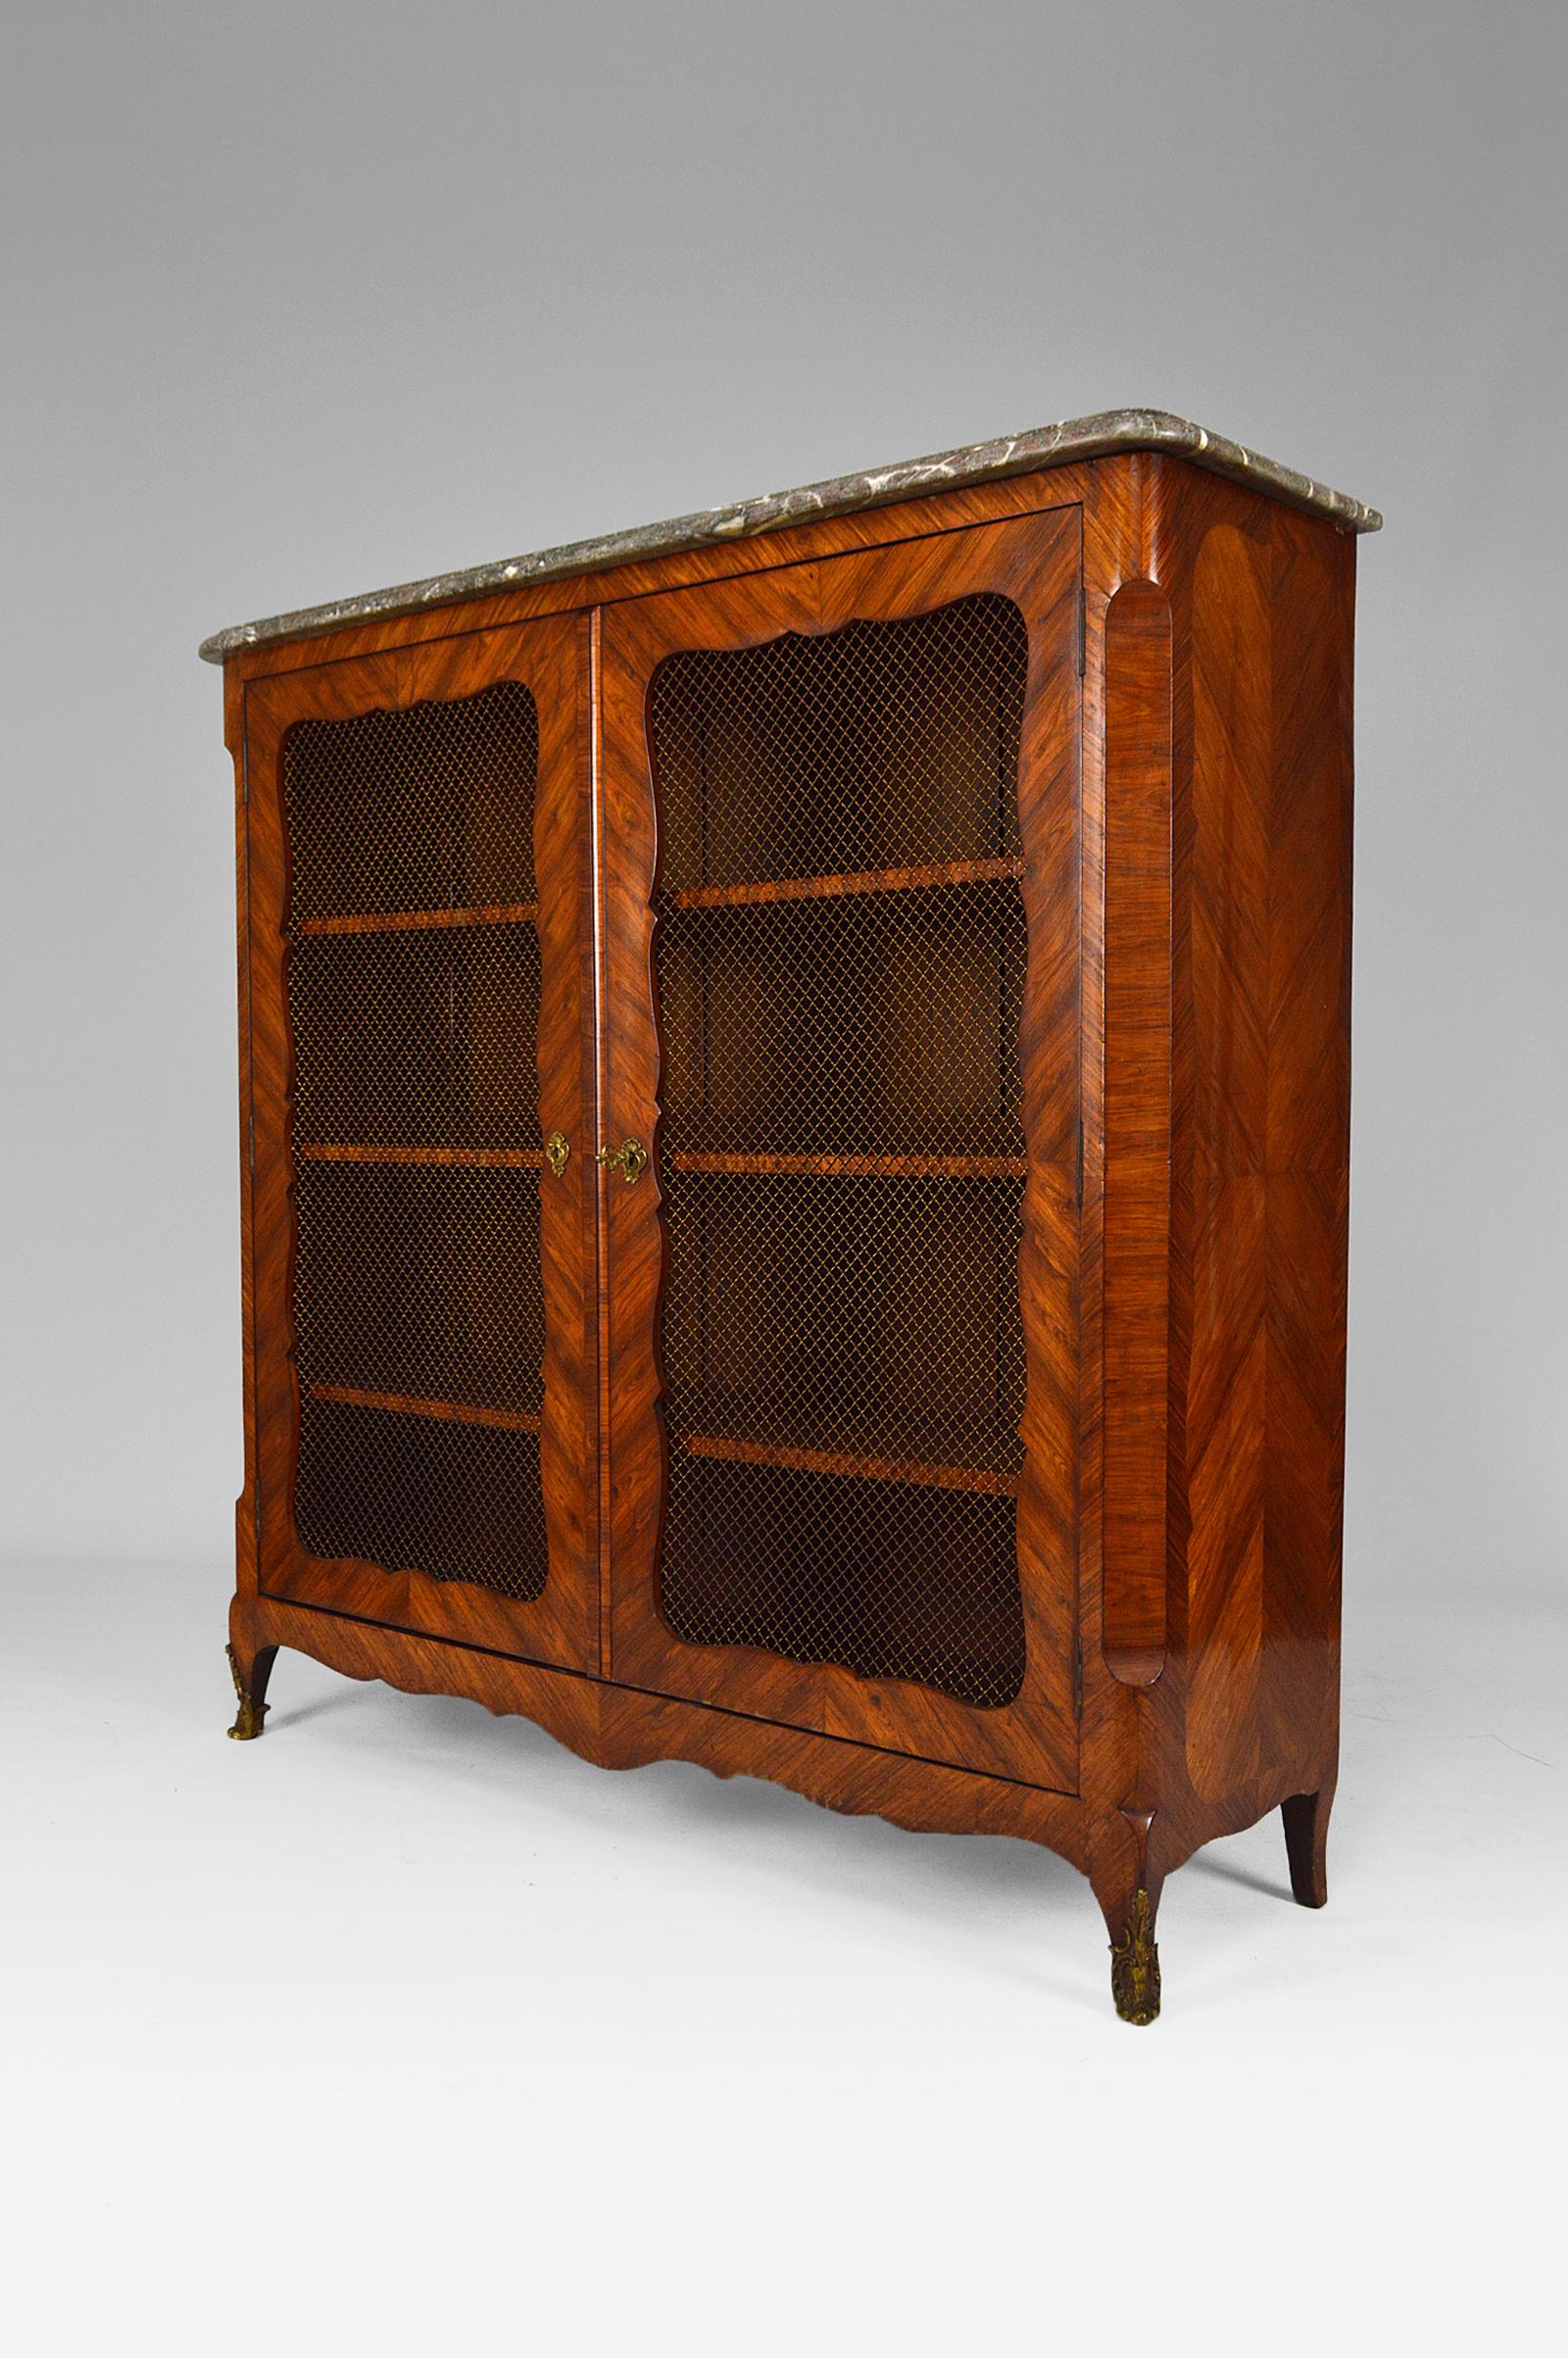 Superb inlaid bookcase / vitrine / showcase with very thick marble top, feet decorated with bronze and double mesh door. 3 shelves present.

In excellent general condition.
Key present, the lock works perfectly

Louis XV style and period, France,